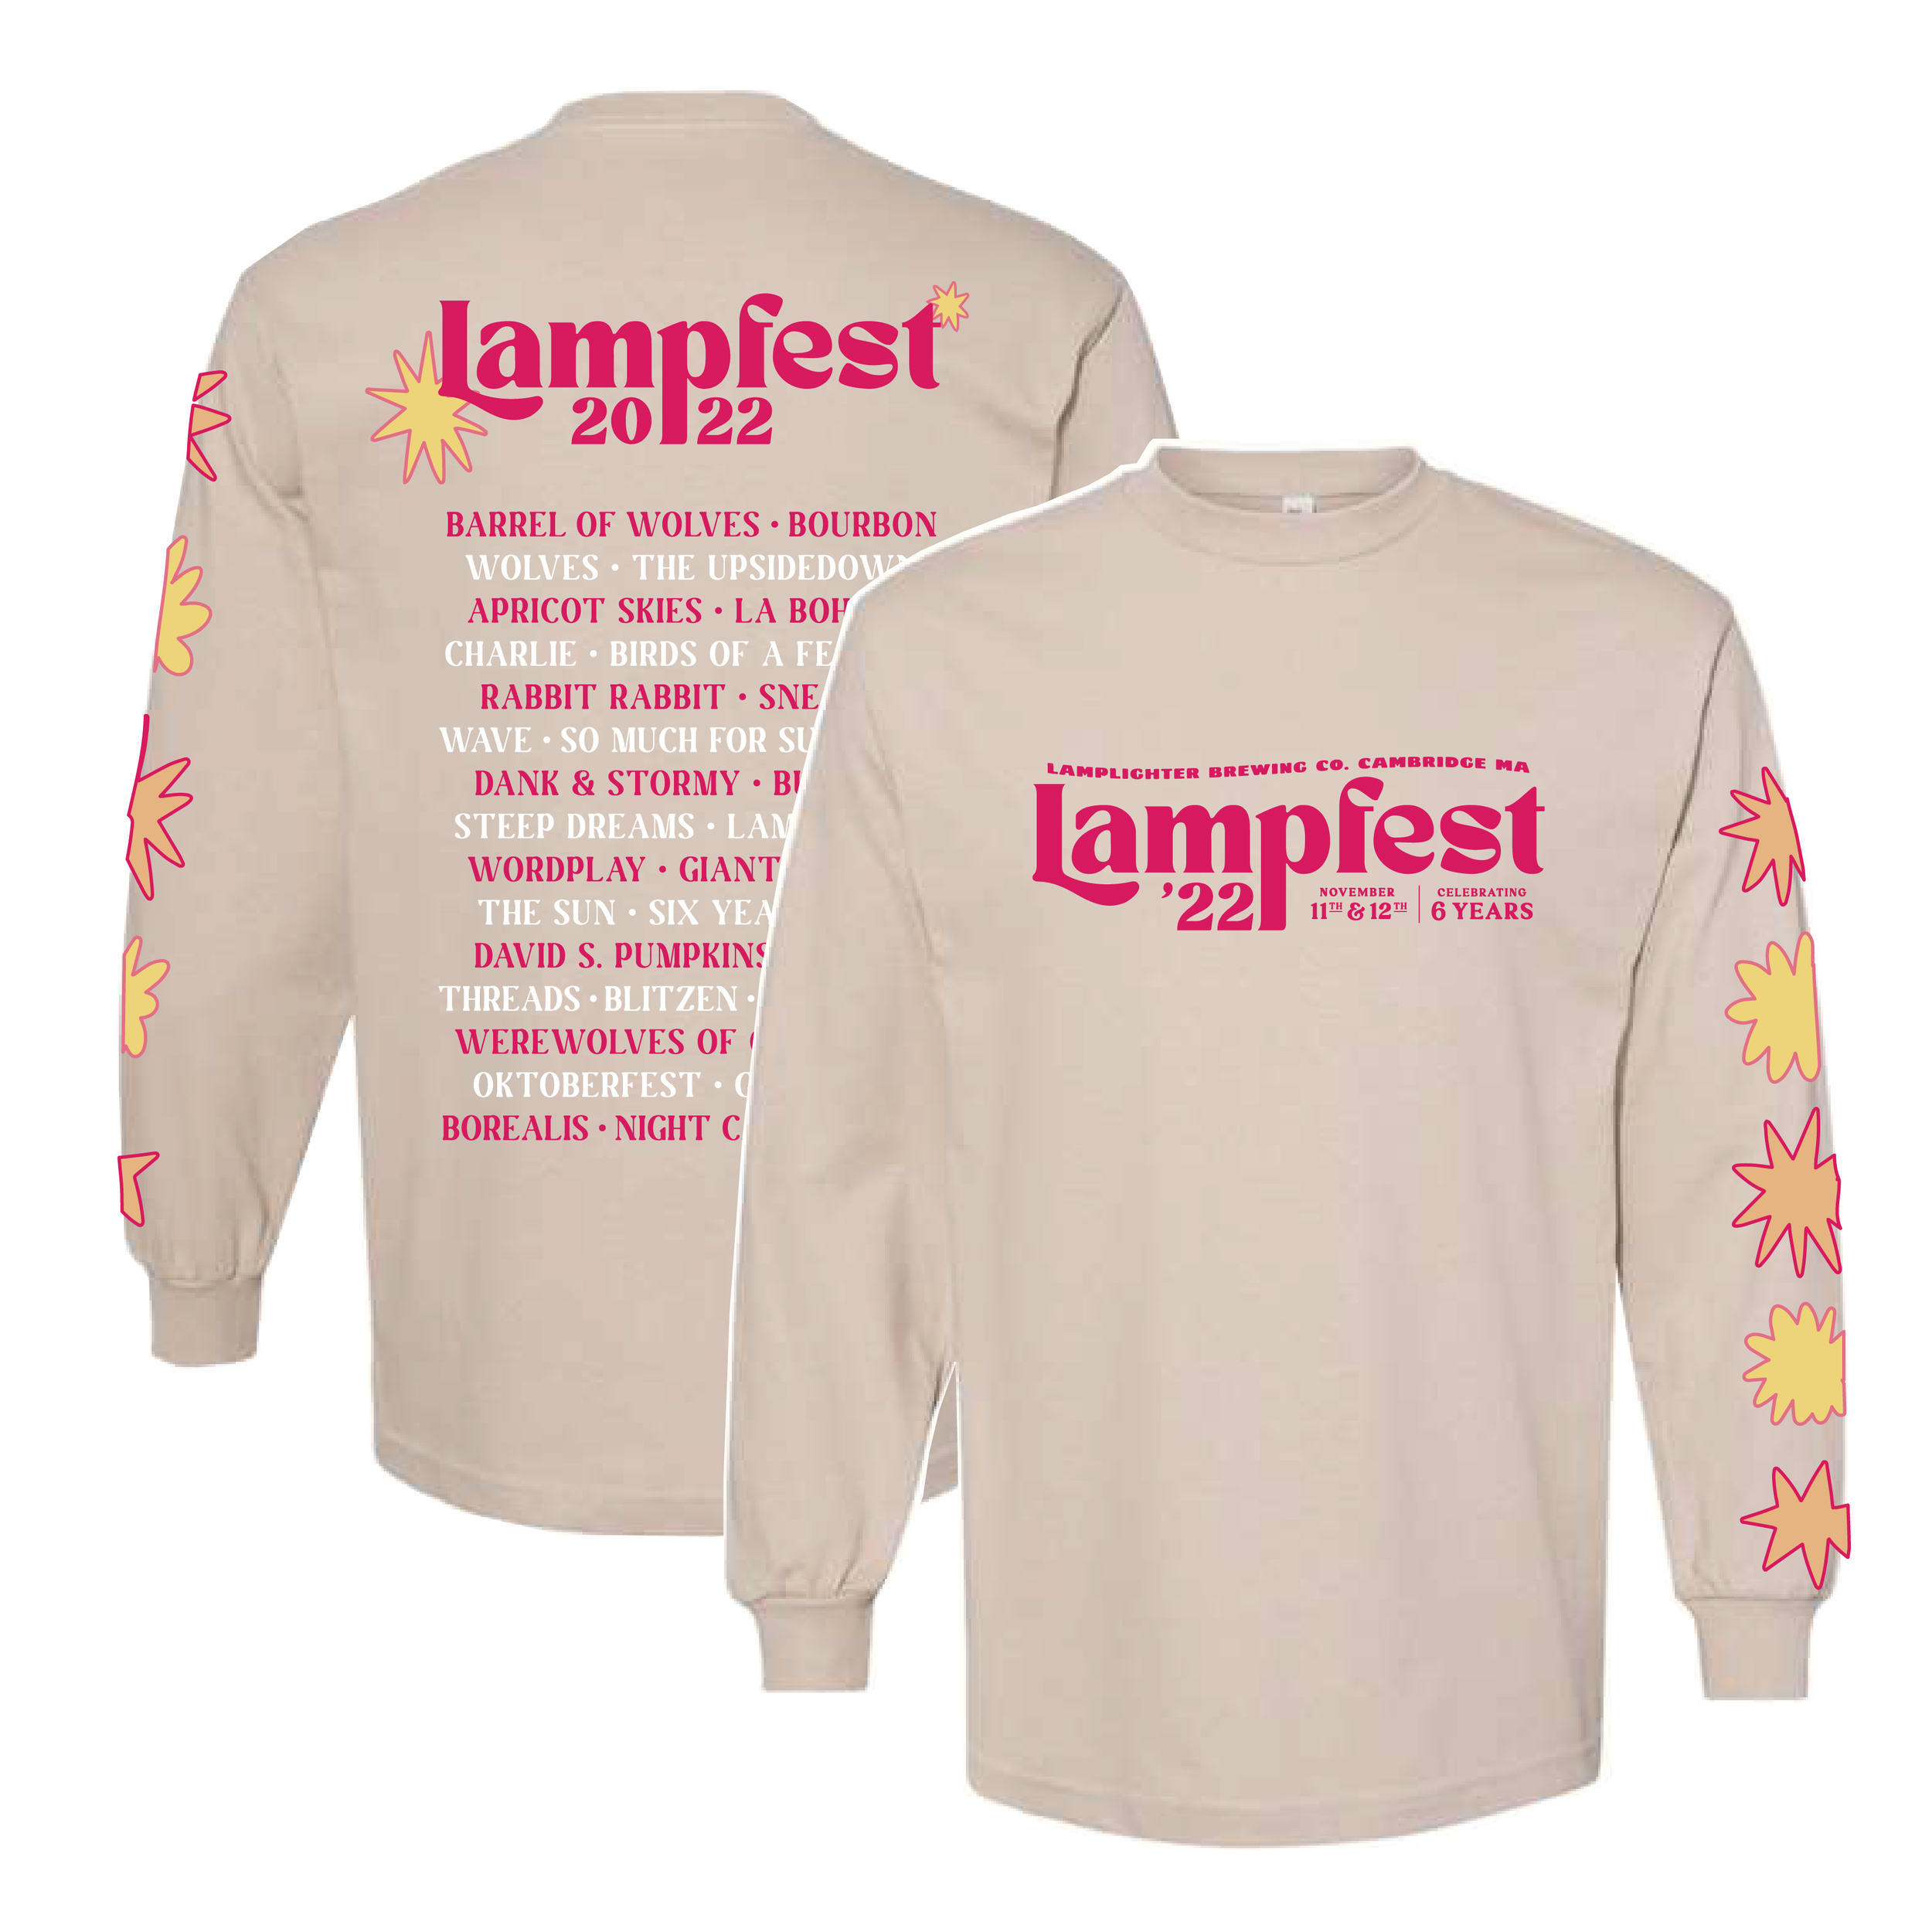 Lampfest Tees 2022 10 15-05.png